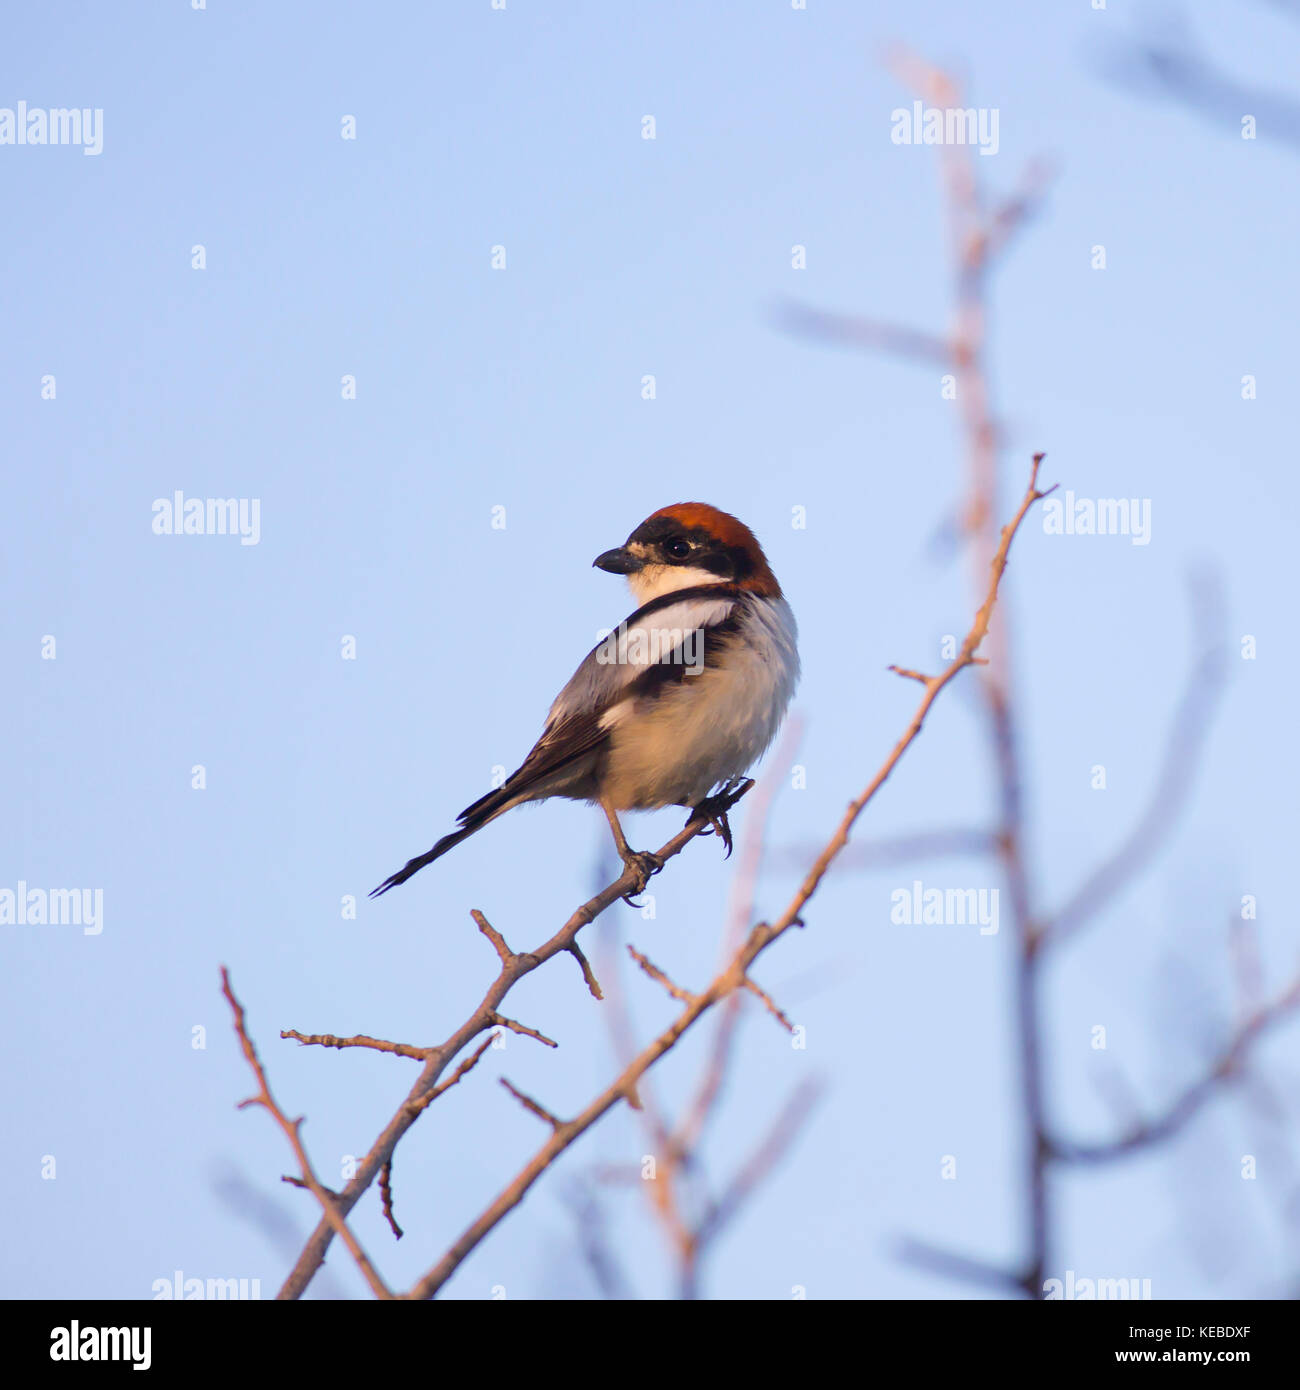 Male Woodchat Shrike (Lanius senator) on a twig. This bird breeds in southern Europe, the Middle East and northwest Africa, and winters in tropical Af Stock Photo